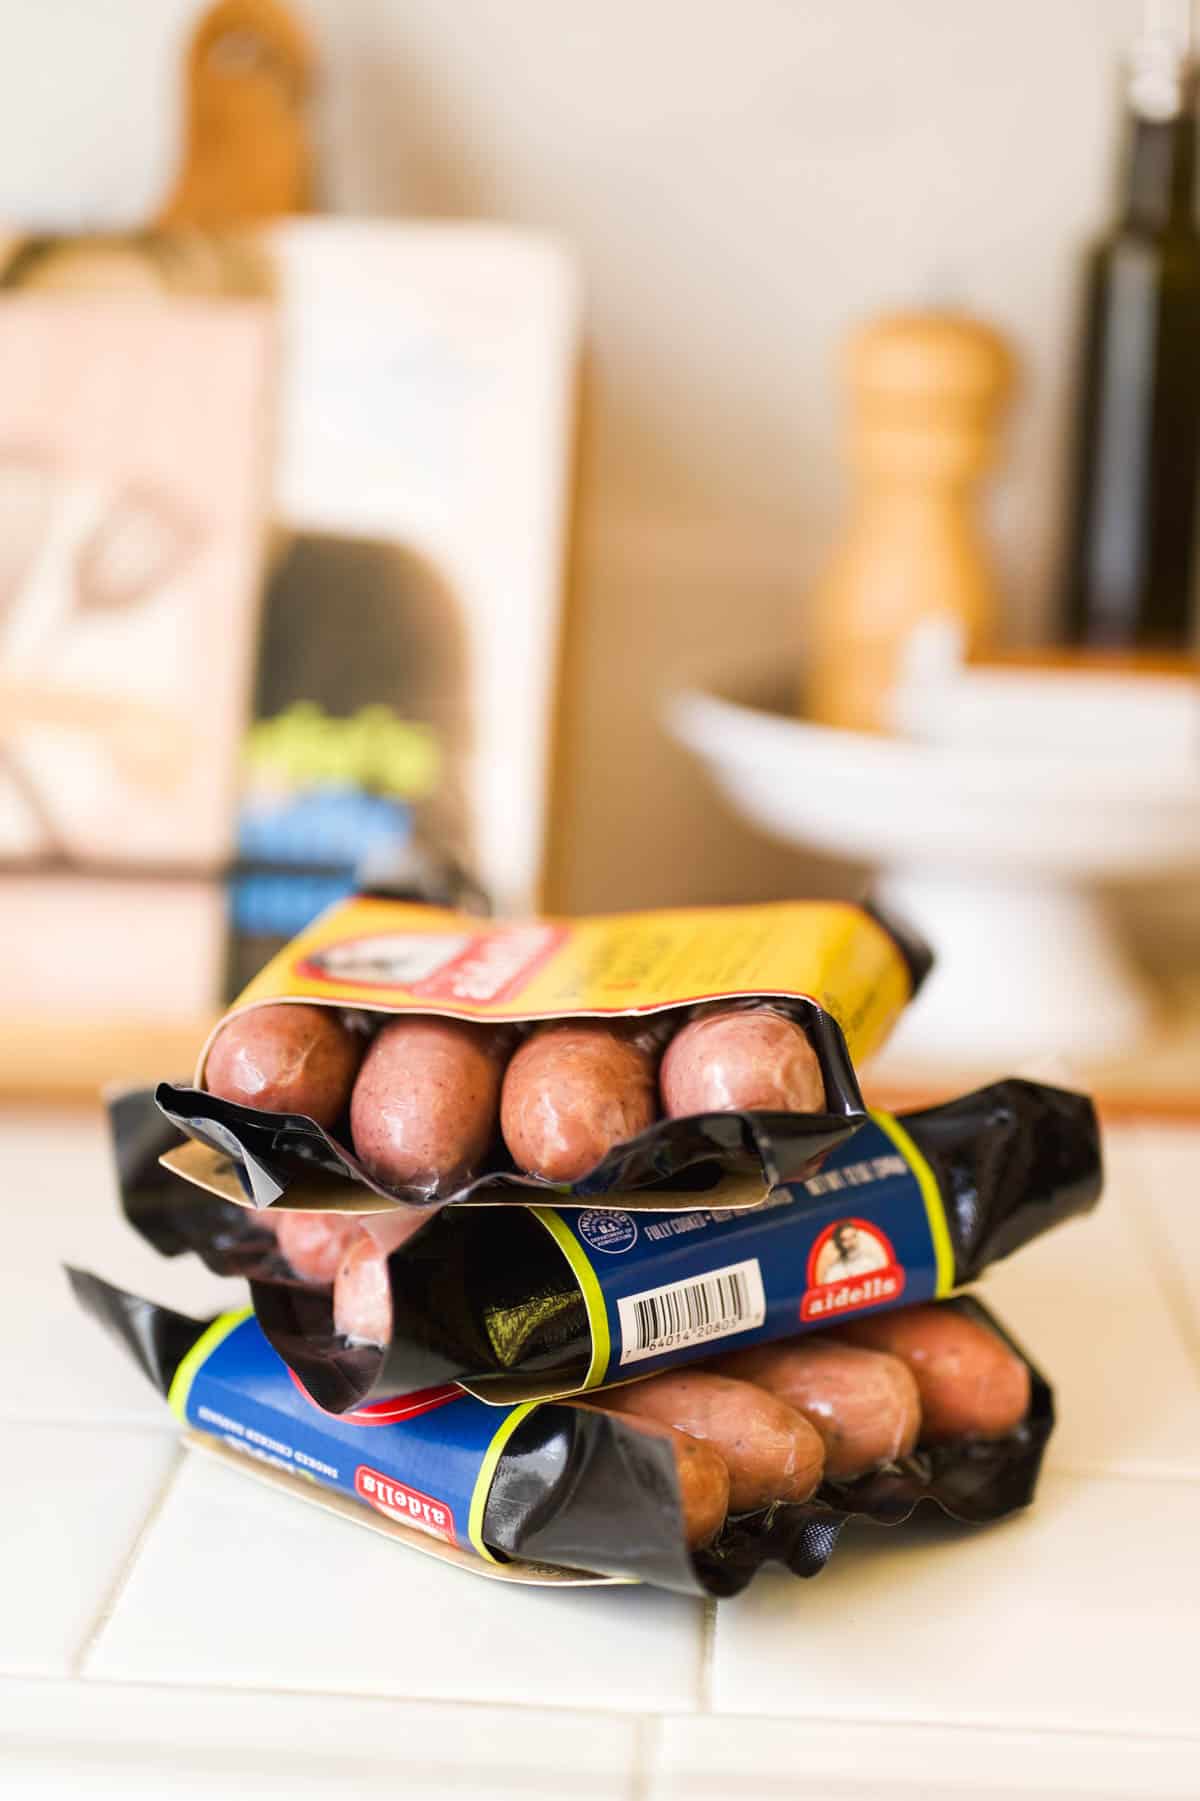 Packages of apple sausage stacked on the counter.